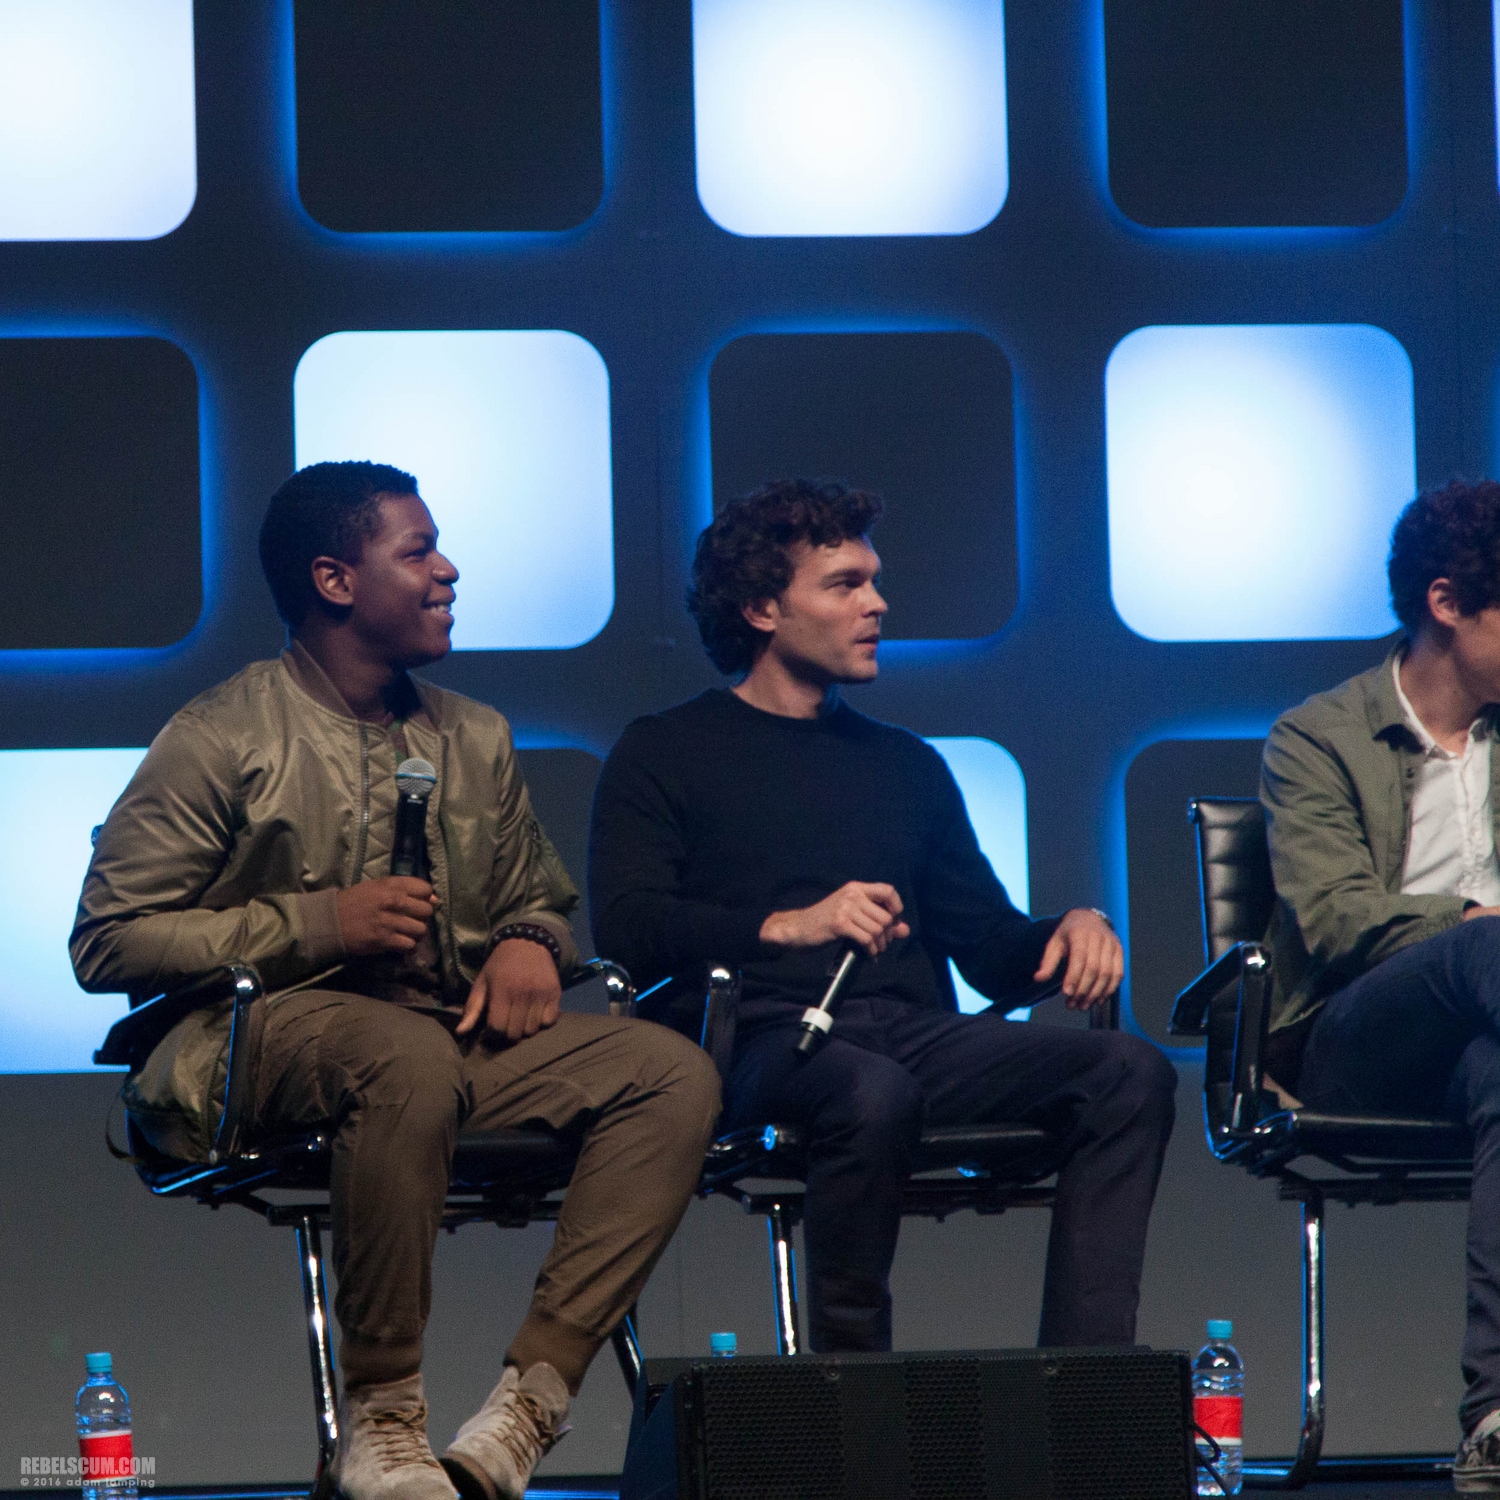 star-wars-celebration-2016-future-filmmakers-and-closing-ceremony-017.jpg